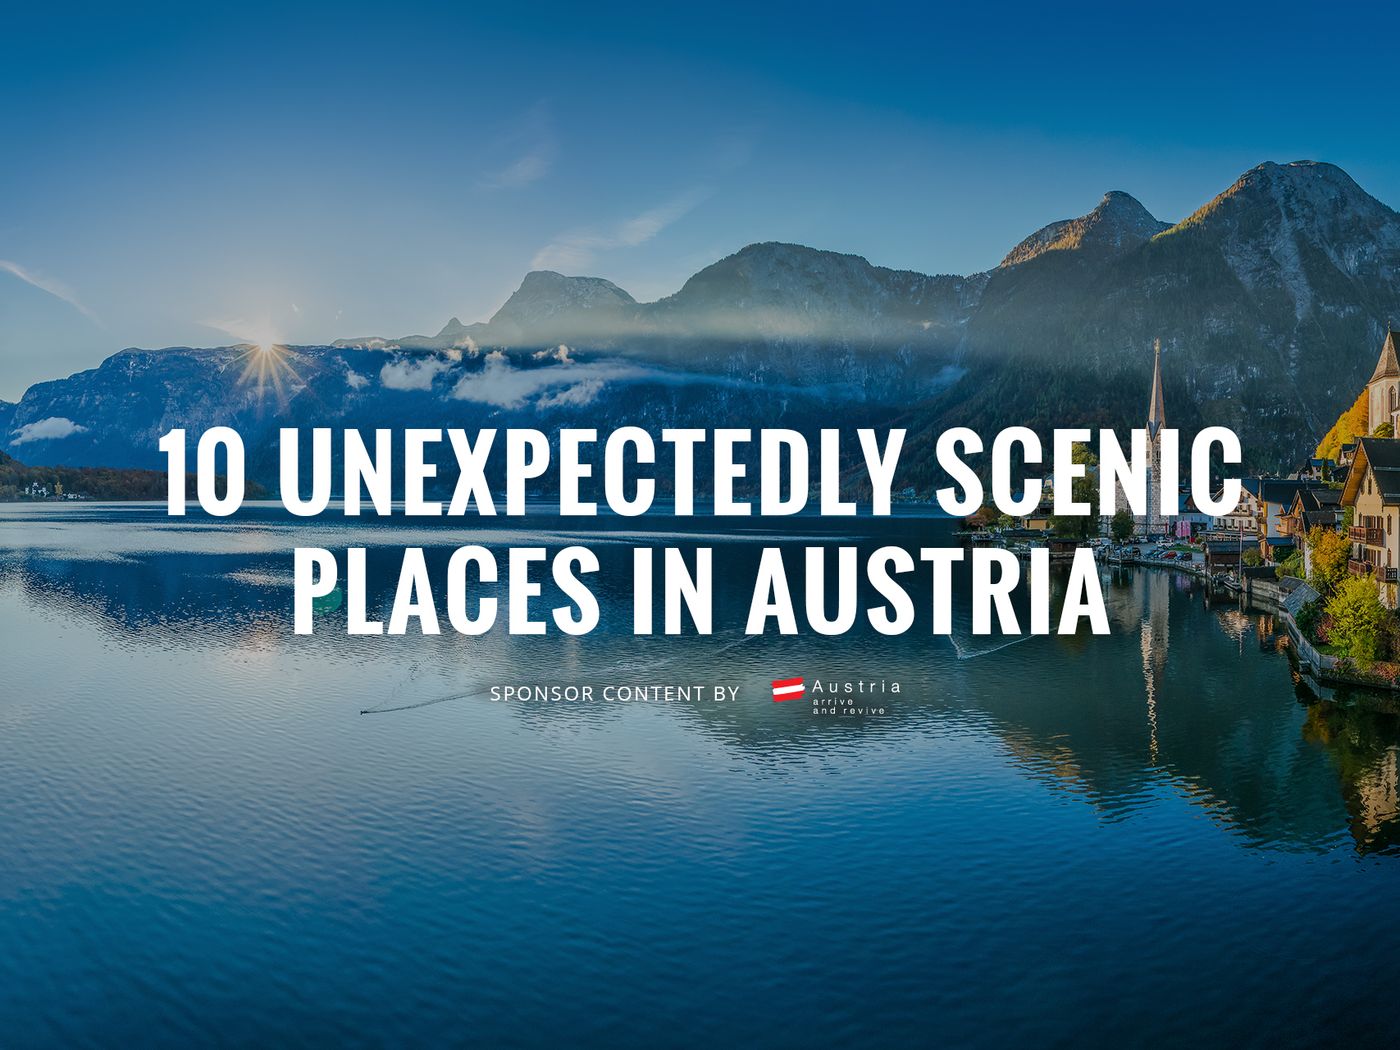 Temerity Dental Flytte 10 Unexpectedly Scenic Places in Austria | Sponsored | Smithsonian Magazine